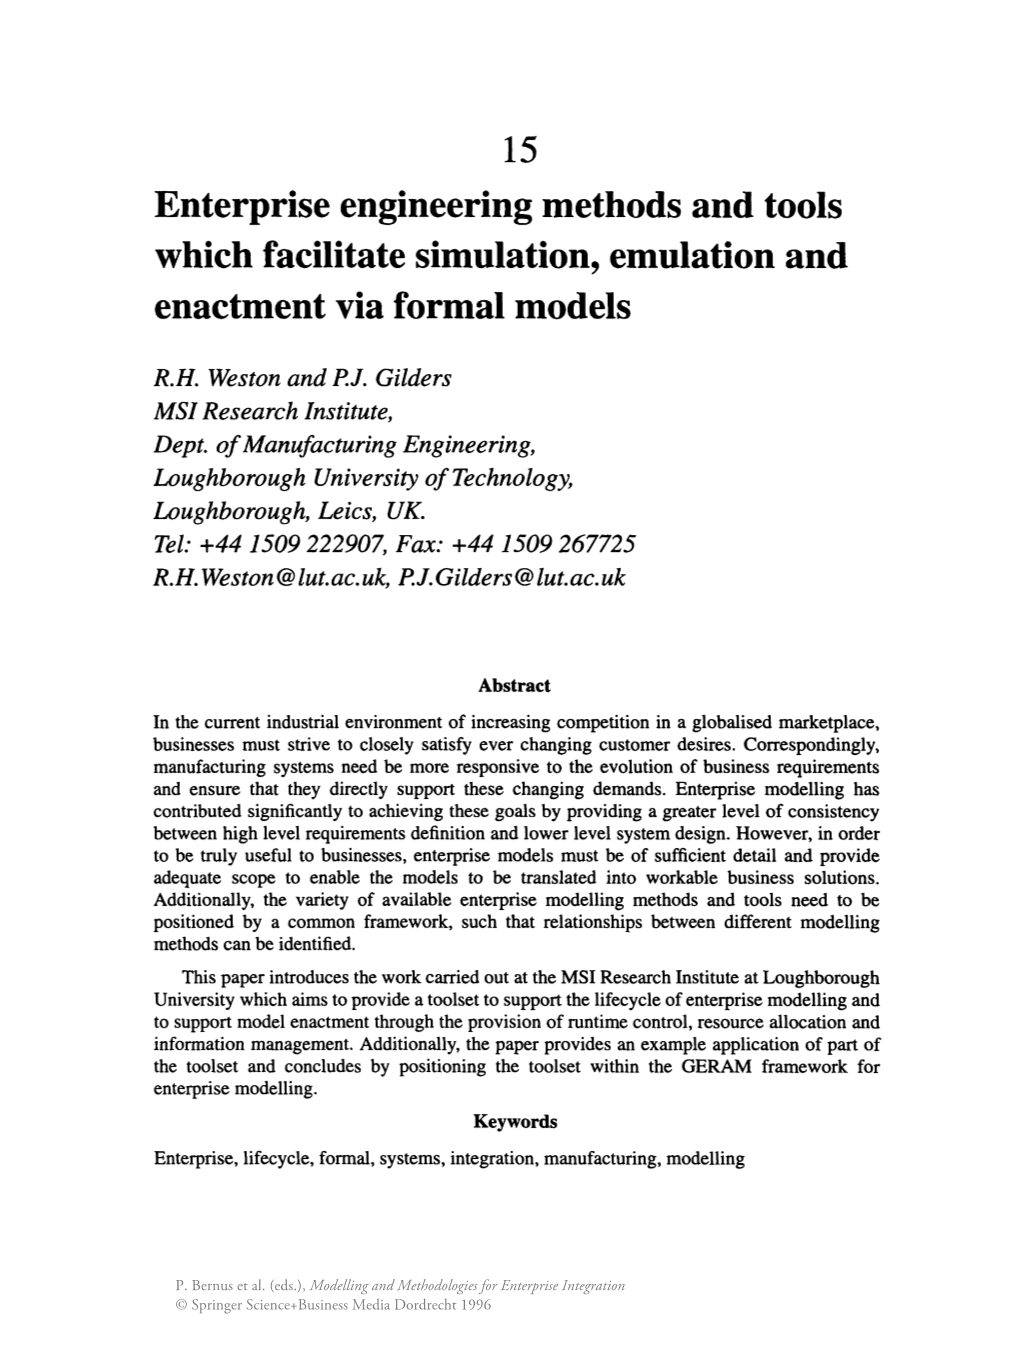 Enterprise Engineering Methods and Tools Which Facilitate Simulation, Emulation and Enactment Via Formal Models